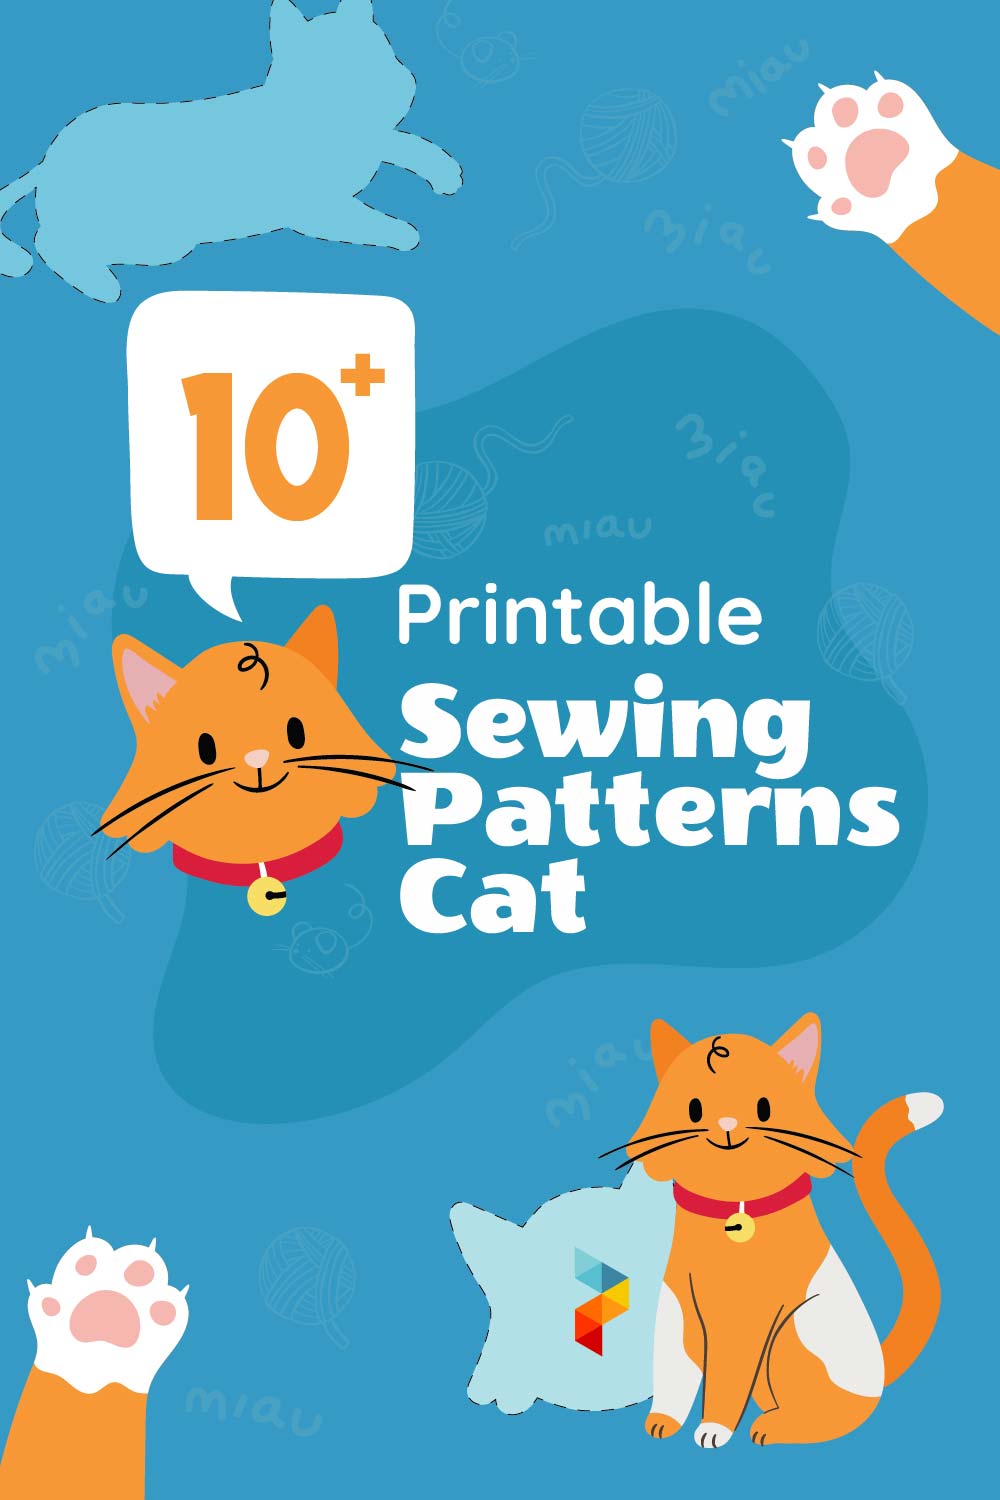 Sewing Patterns Cat